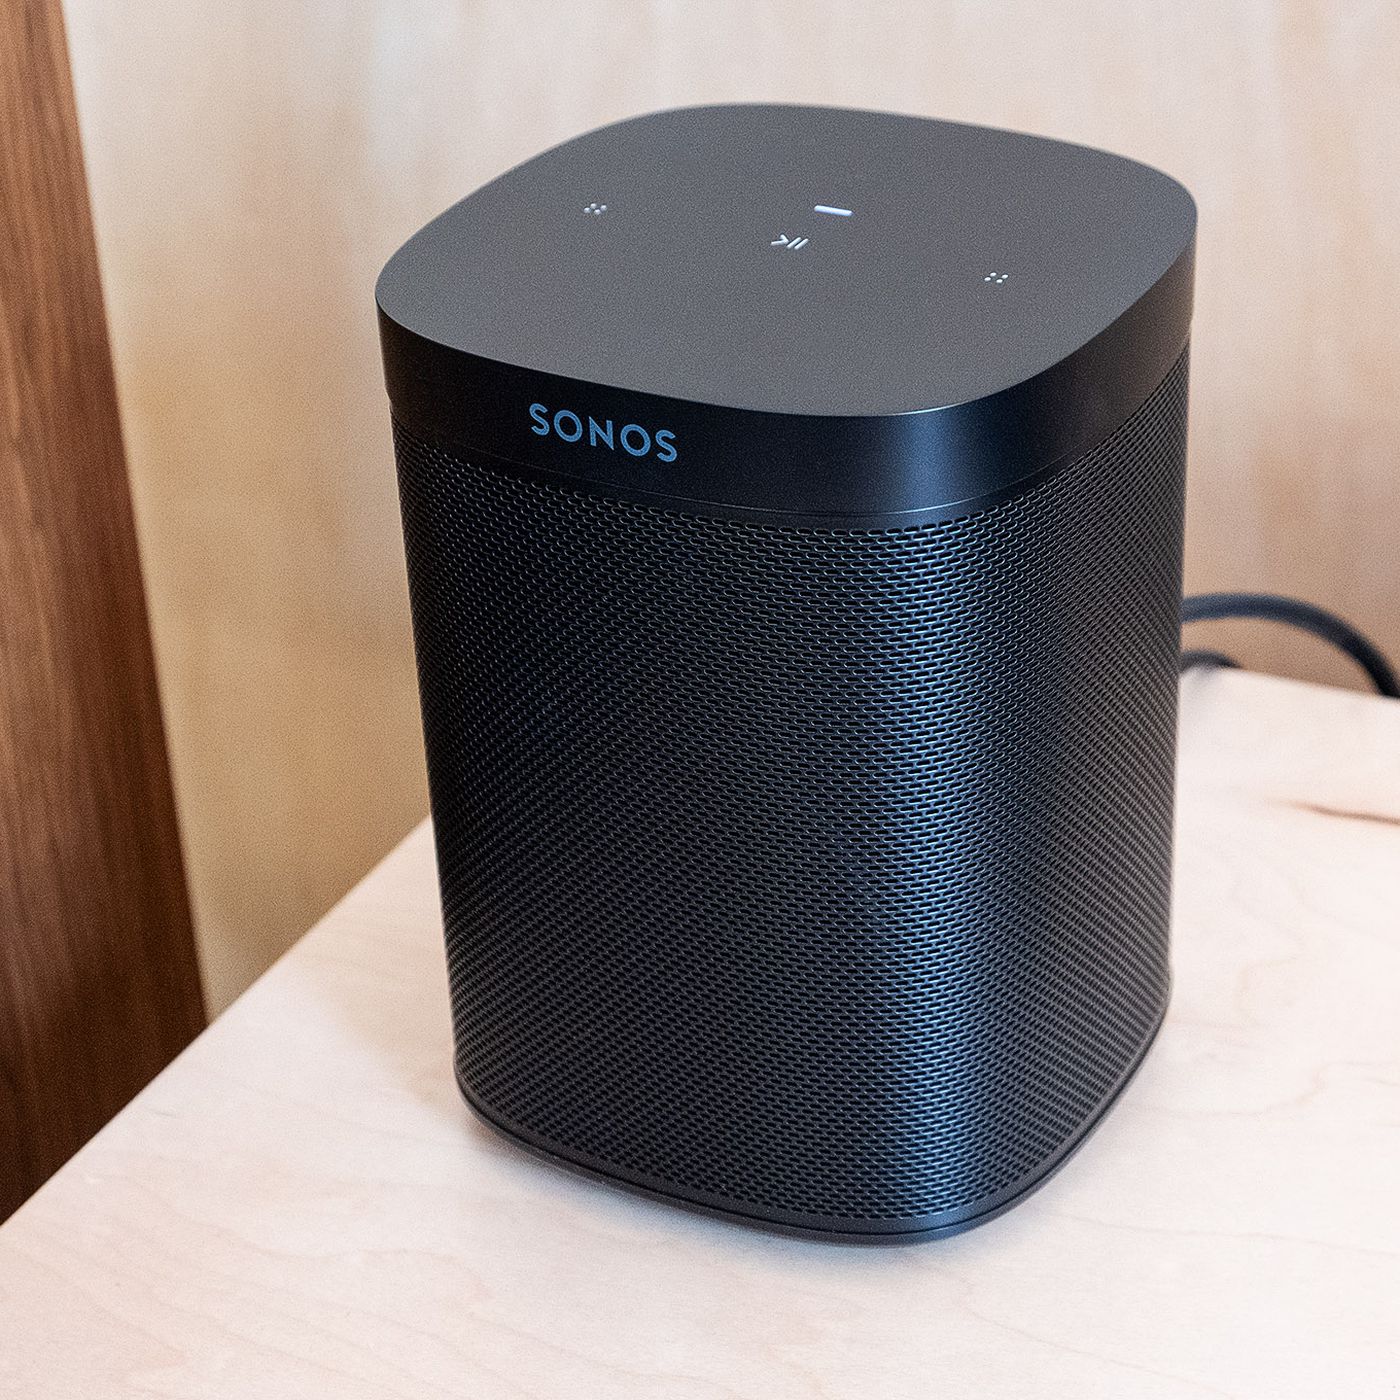 Elendig sang sagtmodighed The Sonos One SL drops the mics - The Verge